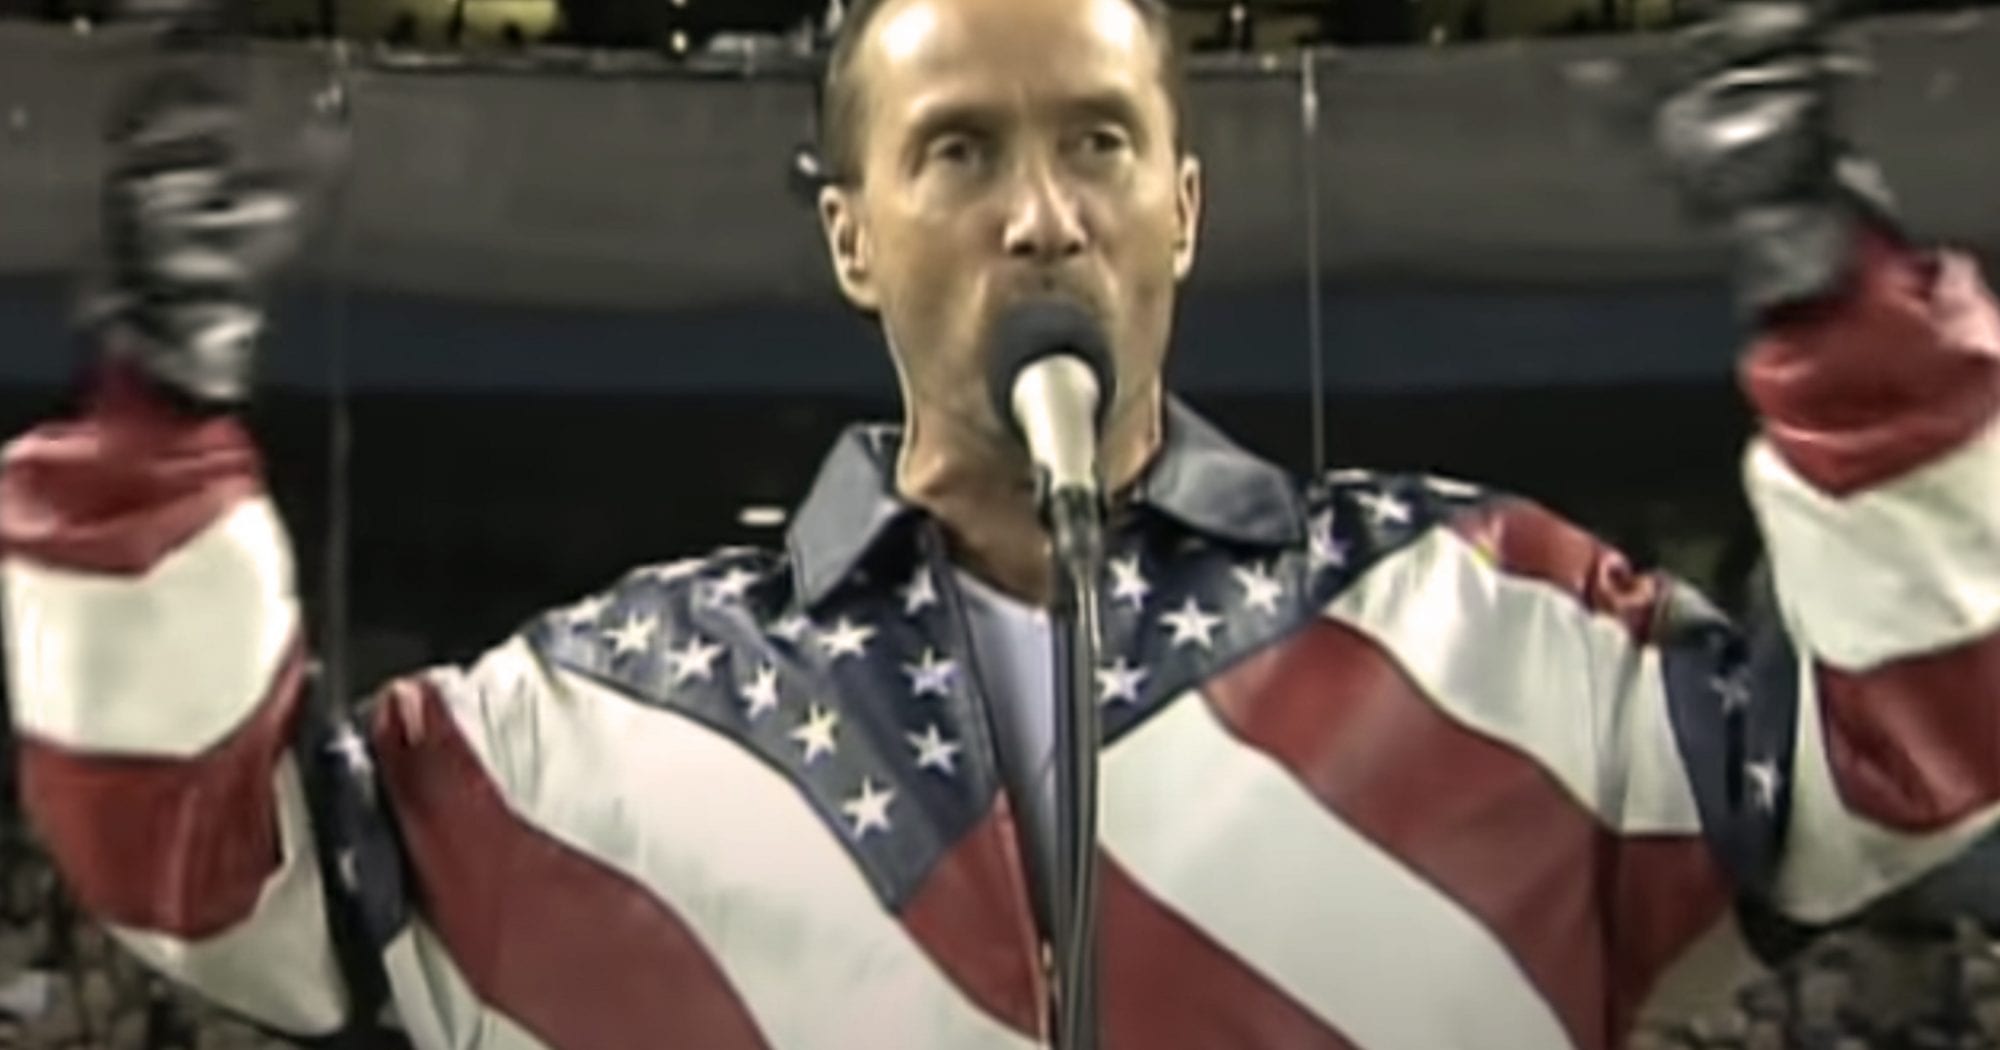 Memorable “God Bless the USA” by Lee Greenwood at Yankee Stadium